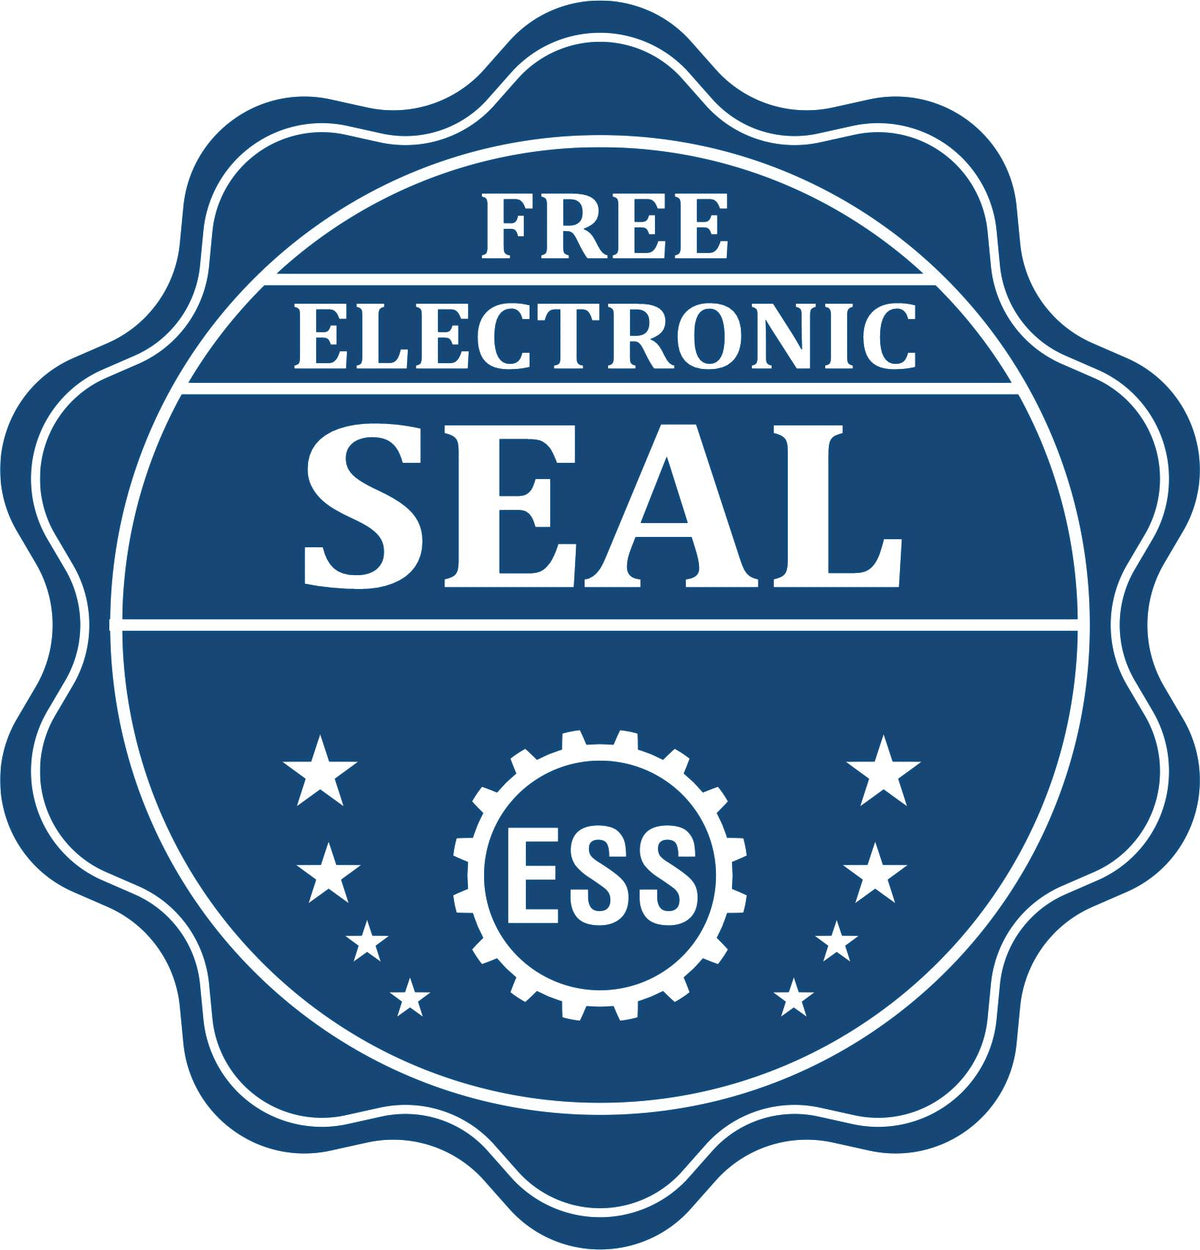 A badge showing a free electronic seal for the Heavy Duty Cast Iron District of Columbia Architect Embosser with stars and the ESS gear on the emblem.